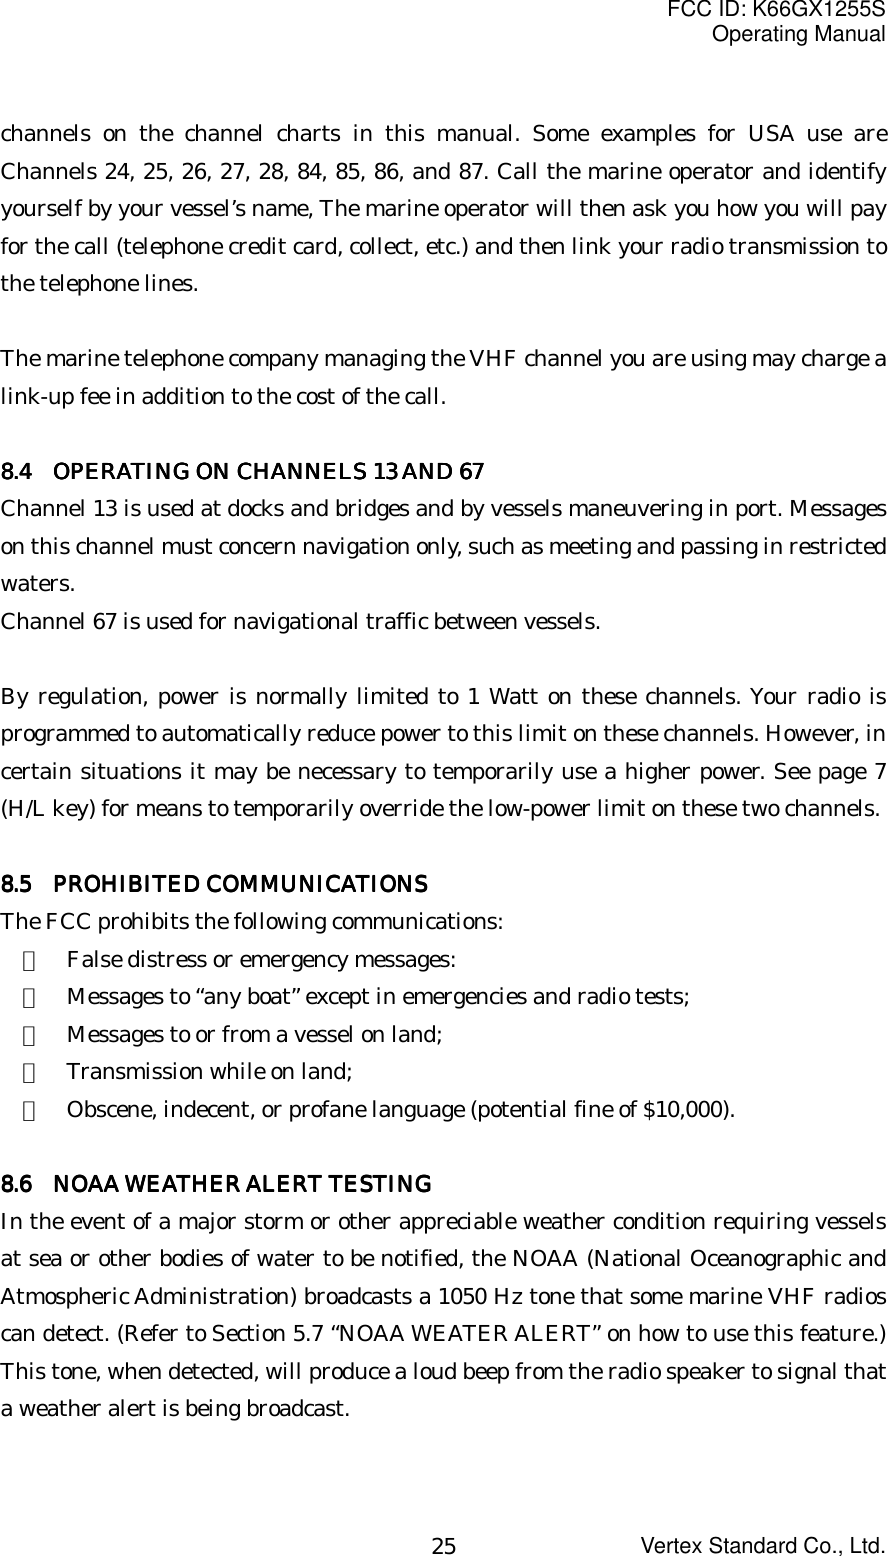 FCC ID: K66GX1255SOperating ManualVertex Standard Co., Ltd.25channels on the channel charts in this manual. Some examples for USA use areChannels 24, 25, 26, 27, 28, 84, 85, 86, and 87. Call the marine operator and identifyyourself by your vessel’s name, The marine operator will then ask you how you will payfor the call (telephone credit card, collect, etc.) and then link your radio transmission tothe telephone lines.The marine telephone company managing the VHF channel you are using may charge alink-up fee in addition to the cost of the call.8888.4.4.4.4       OPERATING ON CHANNELS 13 AND 67  OPERATING ON CHANNELS 13 AND 67  OPERATING ON CHANNELS 13 AND 67  OPERATING ON CHANNELS 13 AND 67Channel 13 is used at docks and bridges and by vessels maneuvering in port. Messageson this channel must concern navigation only, such as meeting and passing in restrictedwaters.Channel 67 is used for navigational traffic between vessels.By regulation, power is normally limited to 1 Watt on these channels. Your radio isprogrammed to automatically reduce power to this limit on these channels. However, incertain situations it may be necessary to temporarily use a higher power. See page 7(H/L key) for means to temporarily override the low-power limit on these two channels.8888.5.5.5.5     PROHIBITED COMMUNICATIONS PROHIBITED COMMUNICATIONS PROHIBITED COMMUNICATIONS PROHIBITED COMMUNICATIONSThe FCC prohibits the following communications:・  False distress or emergency messages:・  Messages to “any boat” except in emergencies and radio tests;・  Messages to or from a vessel on land;・  Transmission while on land;・  Obscene, indecent, or profane language (potential fine of $10,000).8888.6.6.6.6       NOAA WEATHER ALERT TESTING  NOAA WEATHER ALERT TESTING  NOAA WEATHER ALERT TESTING  NOAA WEATHER ALERT TESTINGIn the event of a major storm or other appreciable weather condition requiring vesselsat sea or other bodies of water to be notified, the NOAA (National Oceanographic andAtmospheric Administration) broadcasts a 1050 Hz tone that some marine VHF radioscan detect. (Refer to Section 5.7 “NOAA WEATER ALERT” on how to use this feature.)This tone, when detected, will produce a loud beep from the radio speaker to signal thata weather alert is being broadcast.